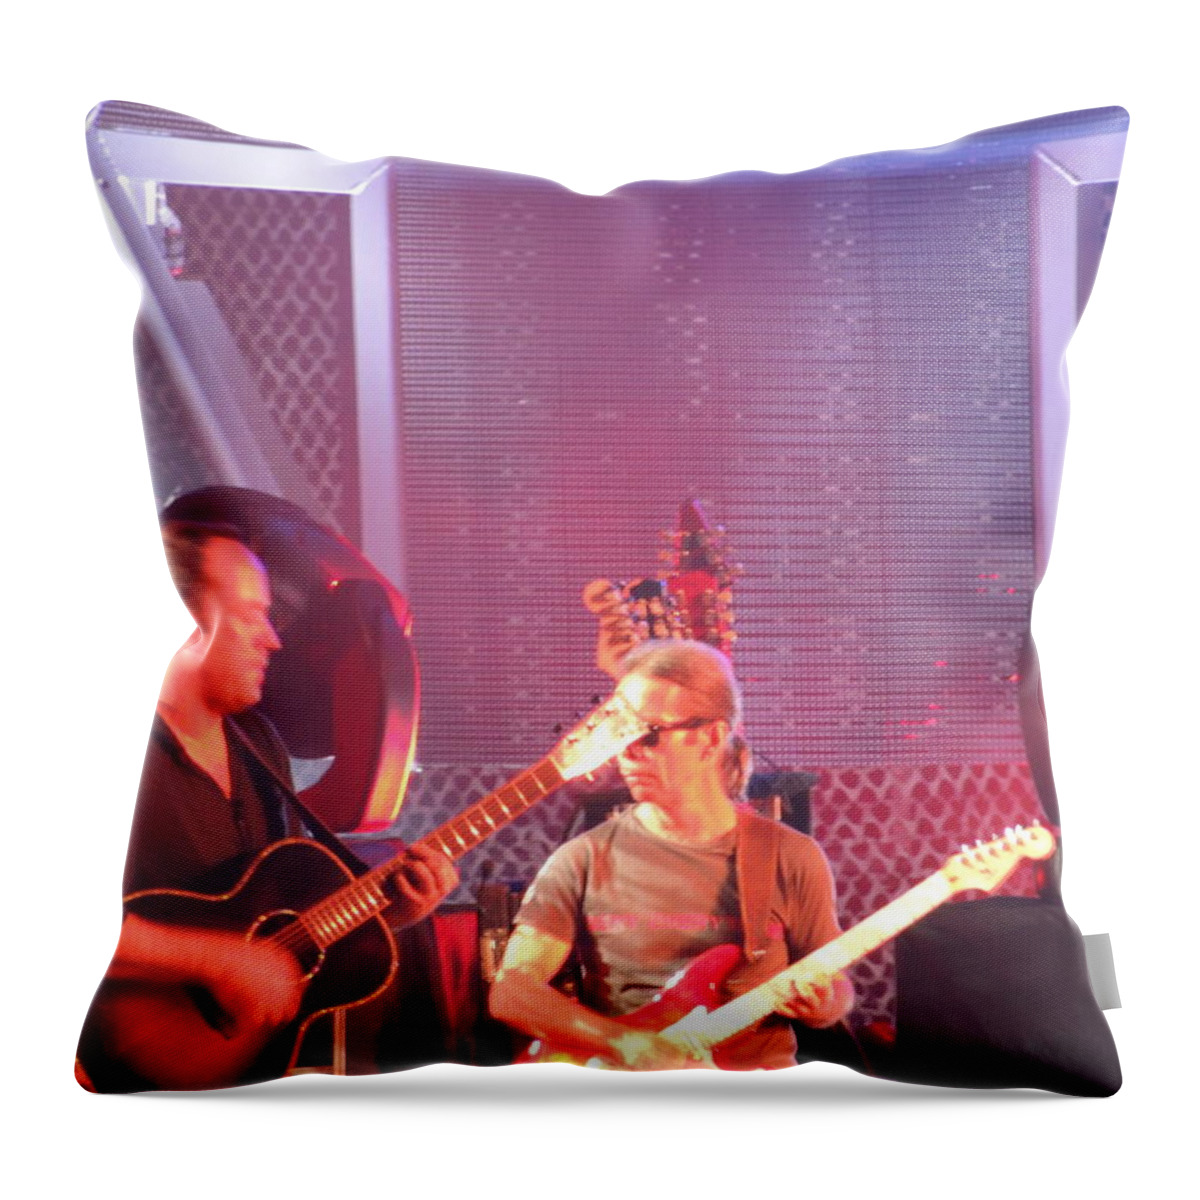 Guitar Playing Throw Pillow featuring the photograph Dave and Tim jam on the guitar by Aaron Martens